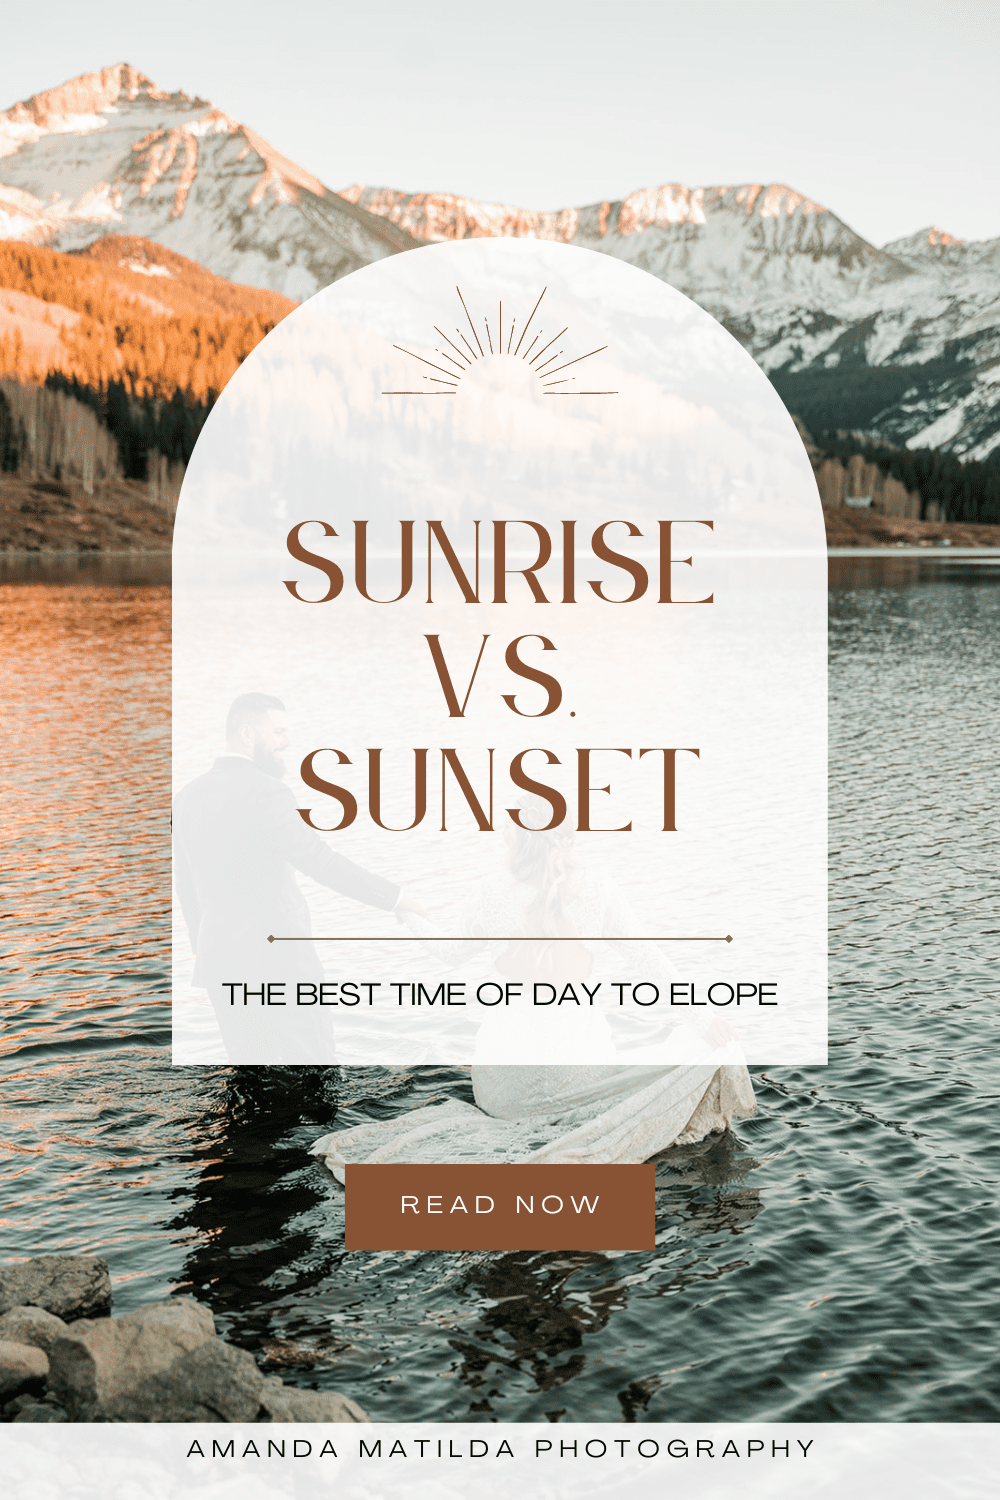 Sunrise Vs. Sunset: The Best Time of Day to Elope